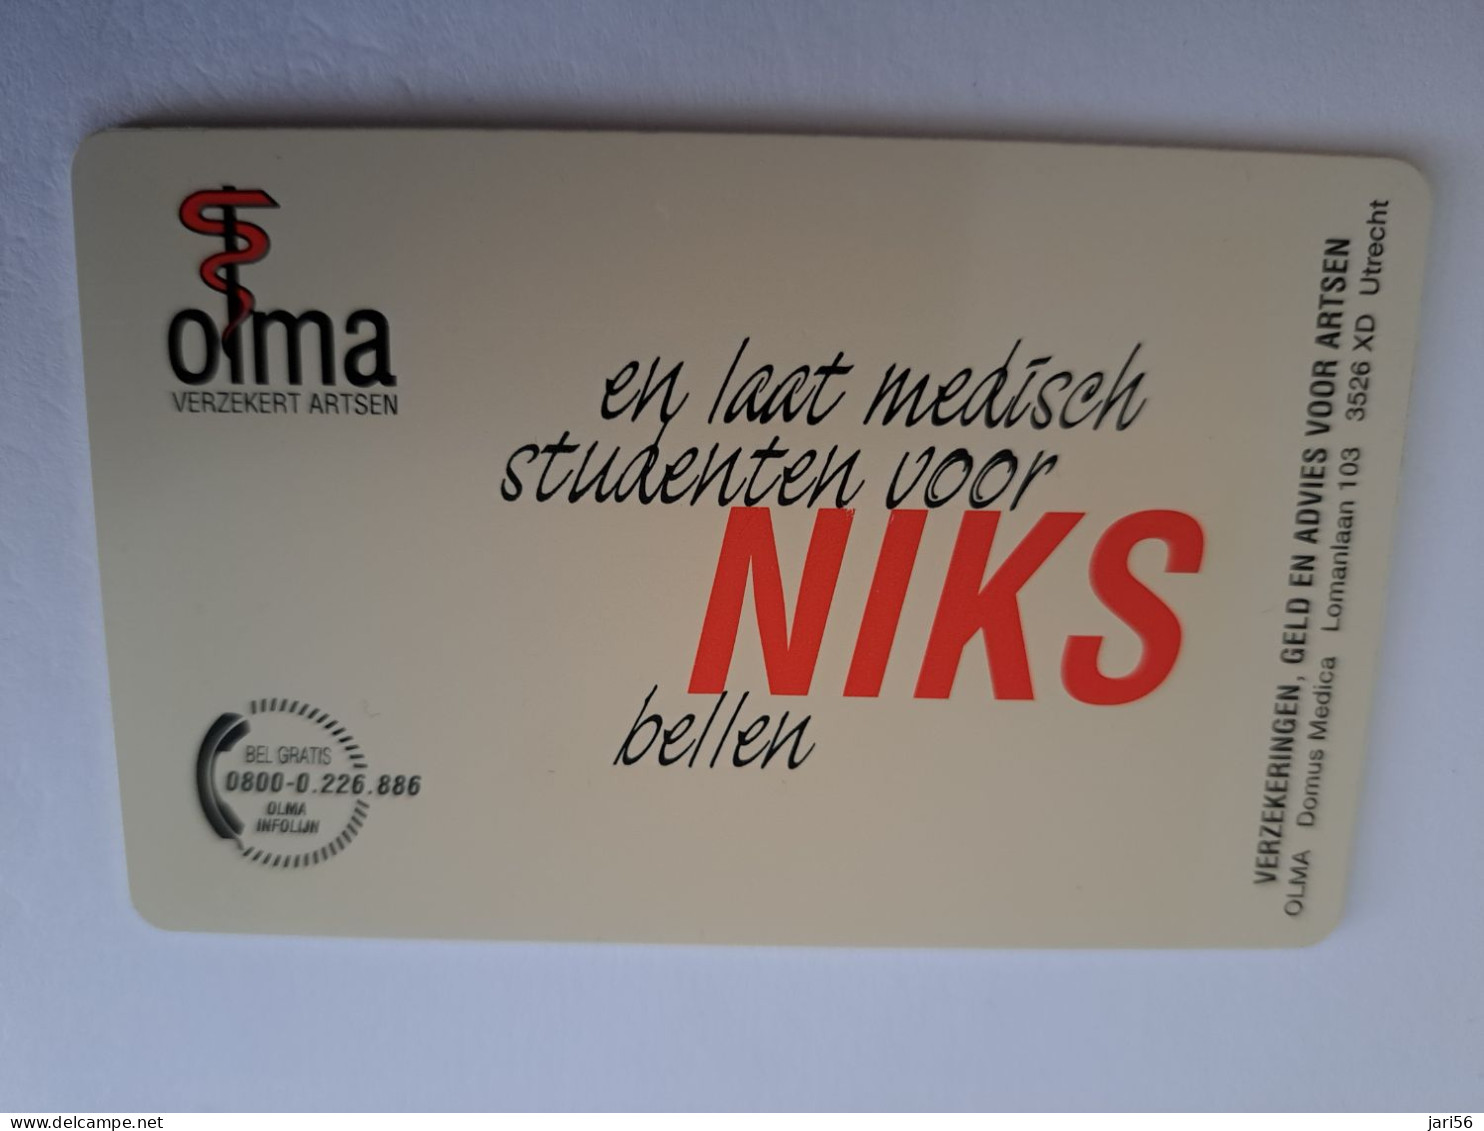 NETHERLANDS / CHIP ADVERTISING CARD/ HFL 5,00  / OLMA/ MEDICAL STUDENTS    /     CRE 451** 14598** - Private